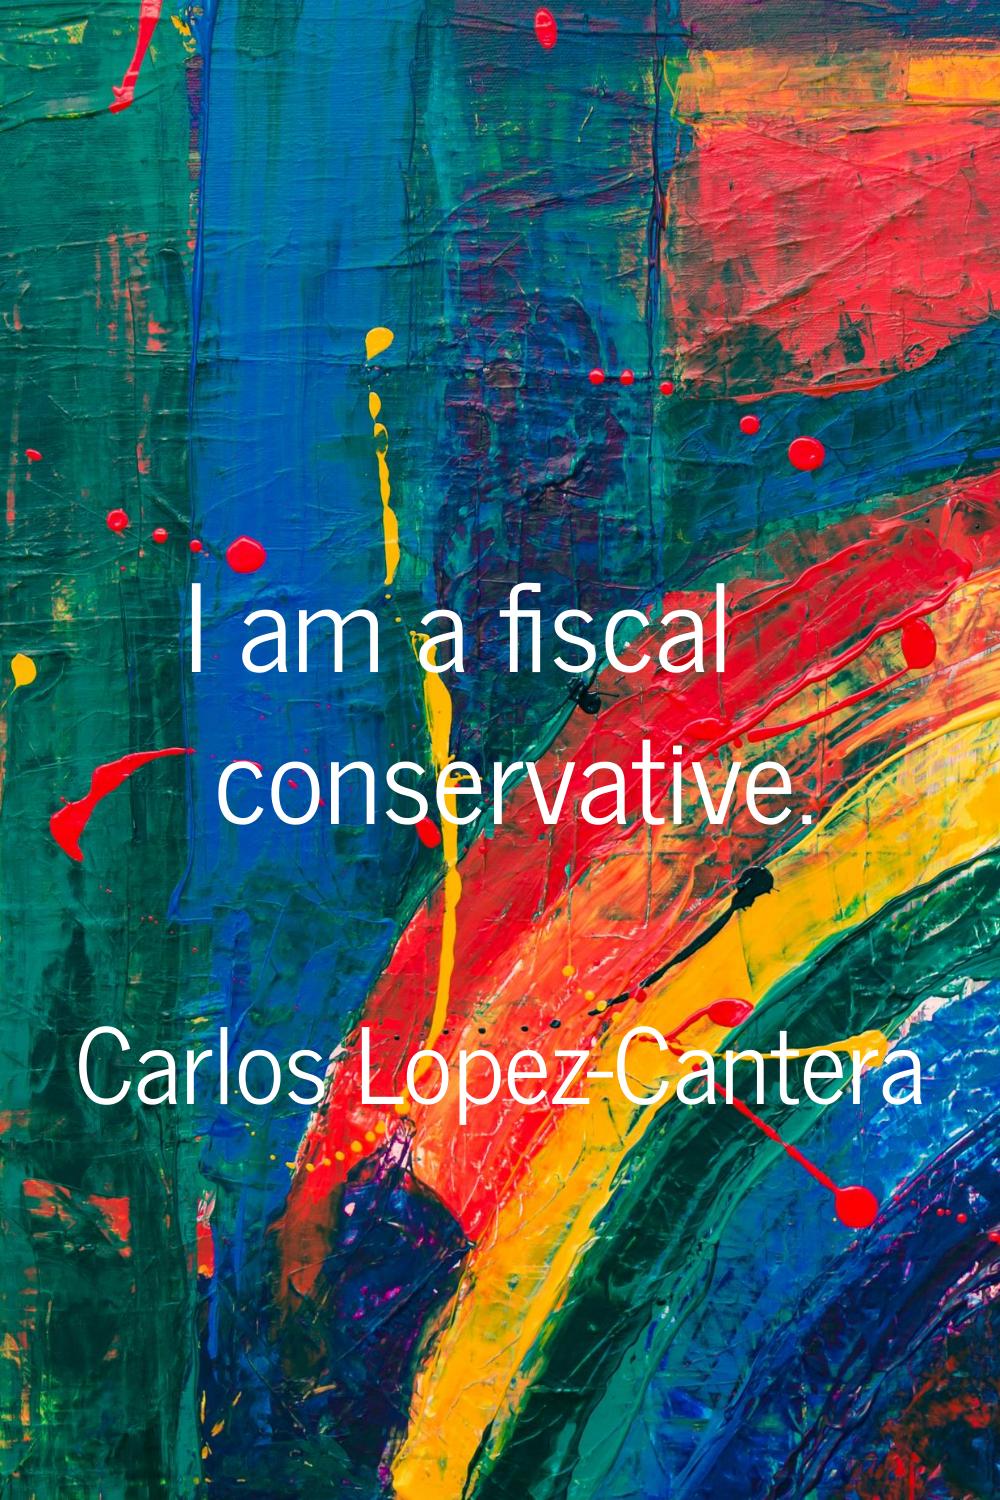 I am a fiscal conservative.